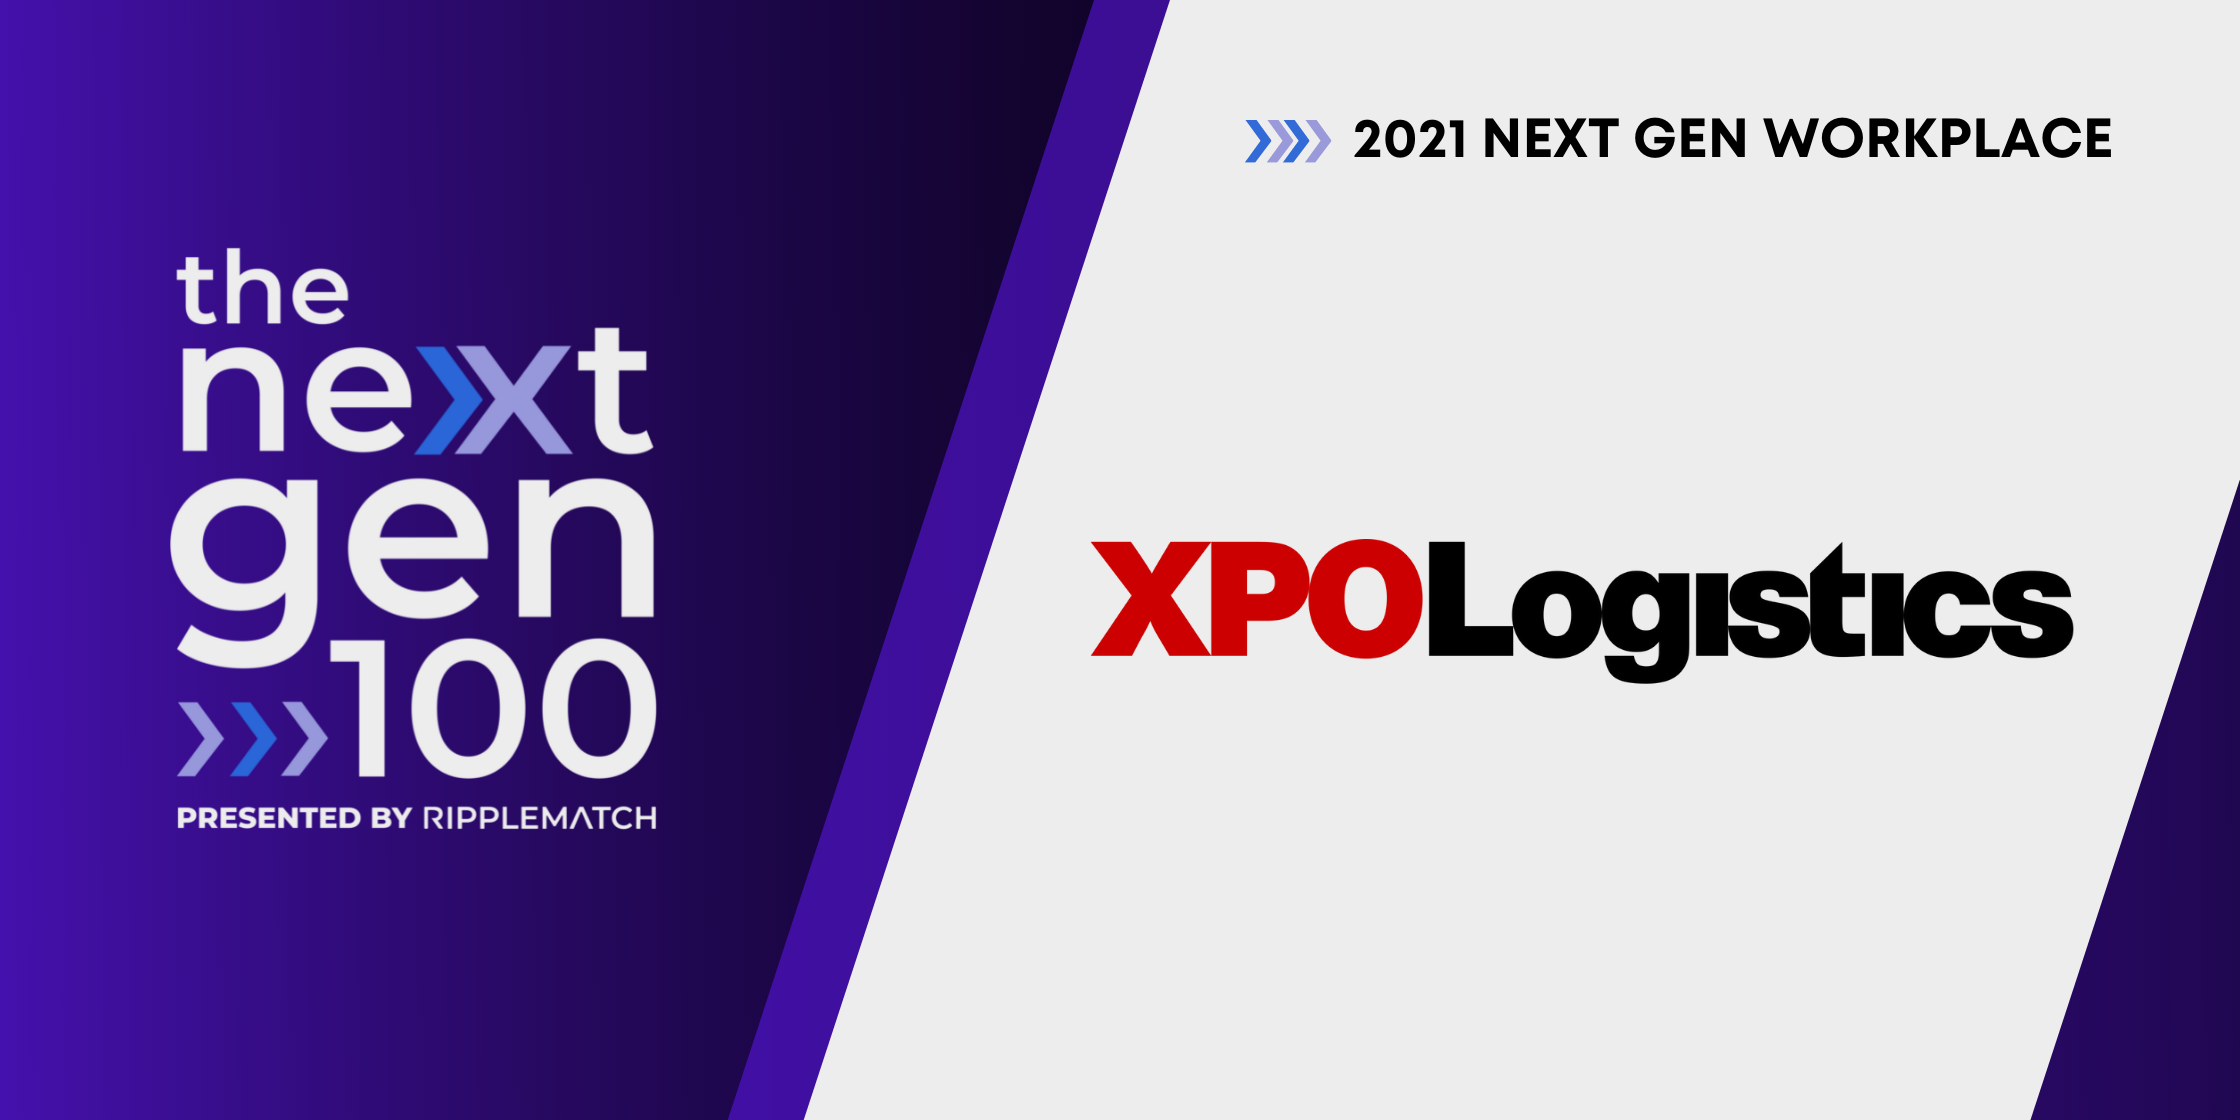 XPO Logistics is a Top 100 Next Gen Workplace 2021